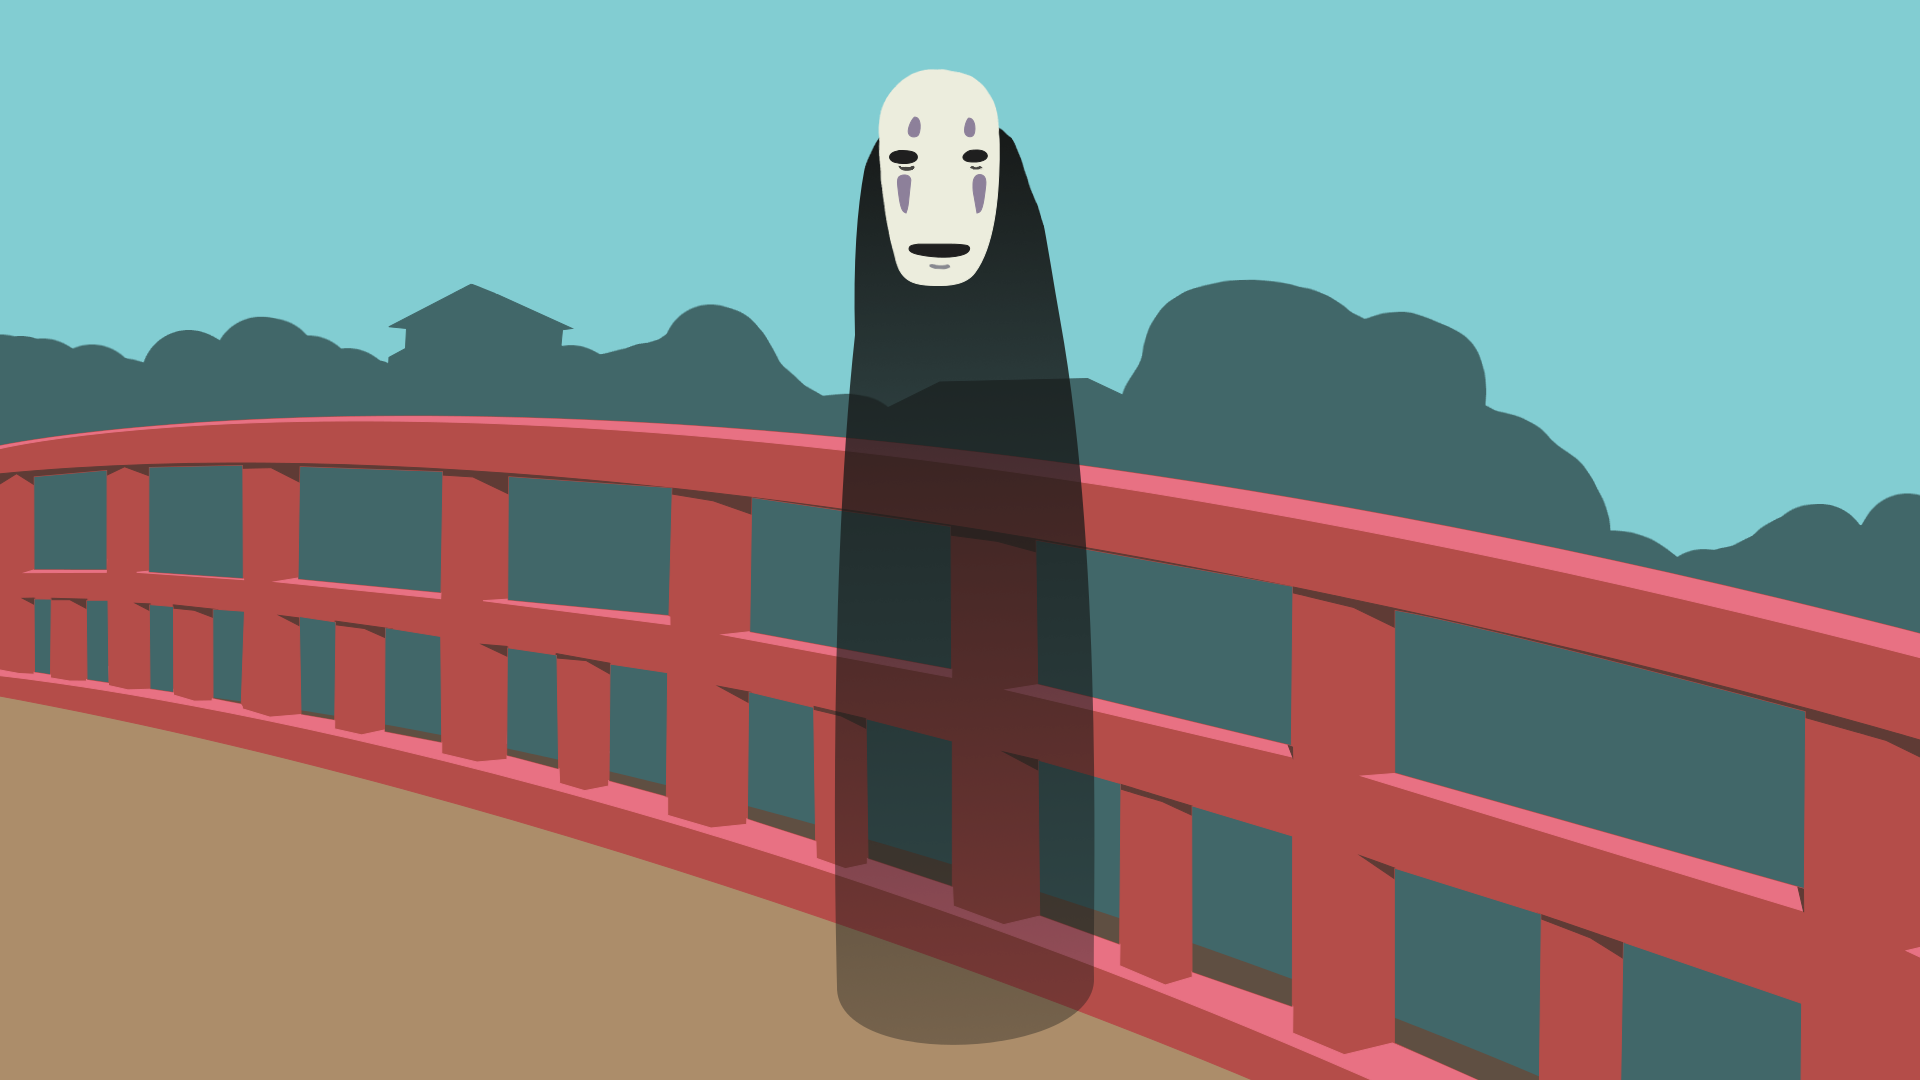 Spirited Away - No Face カオナシ by Rania Younis on Dribbble